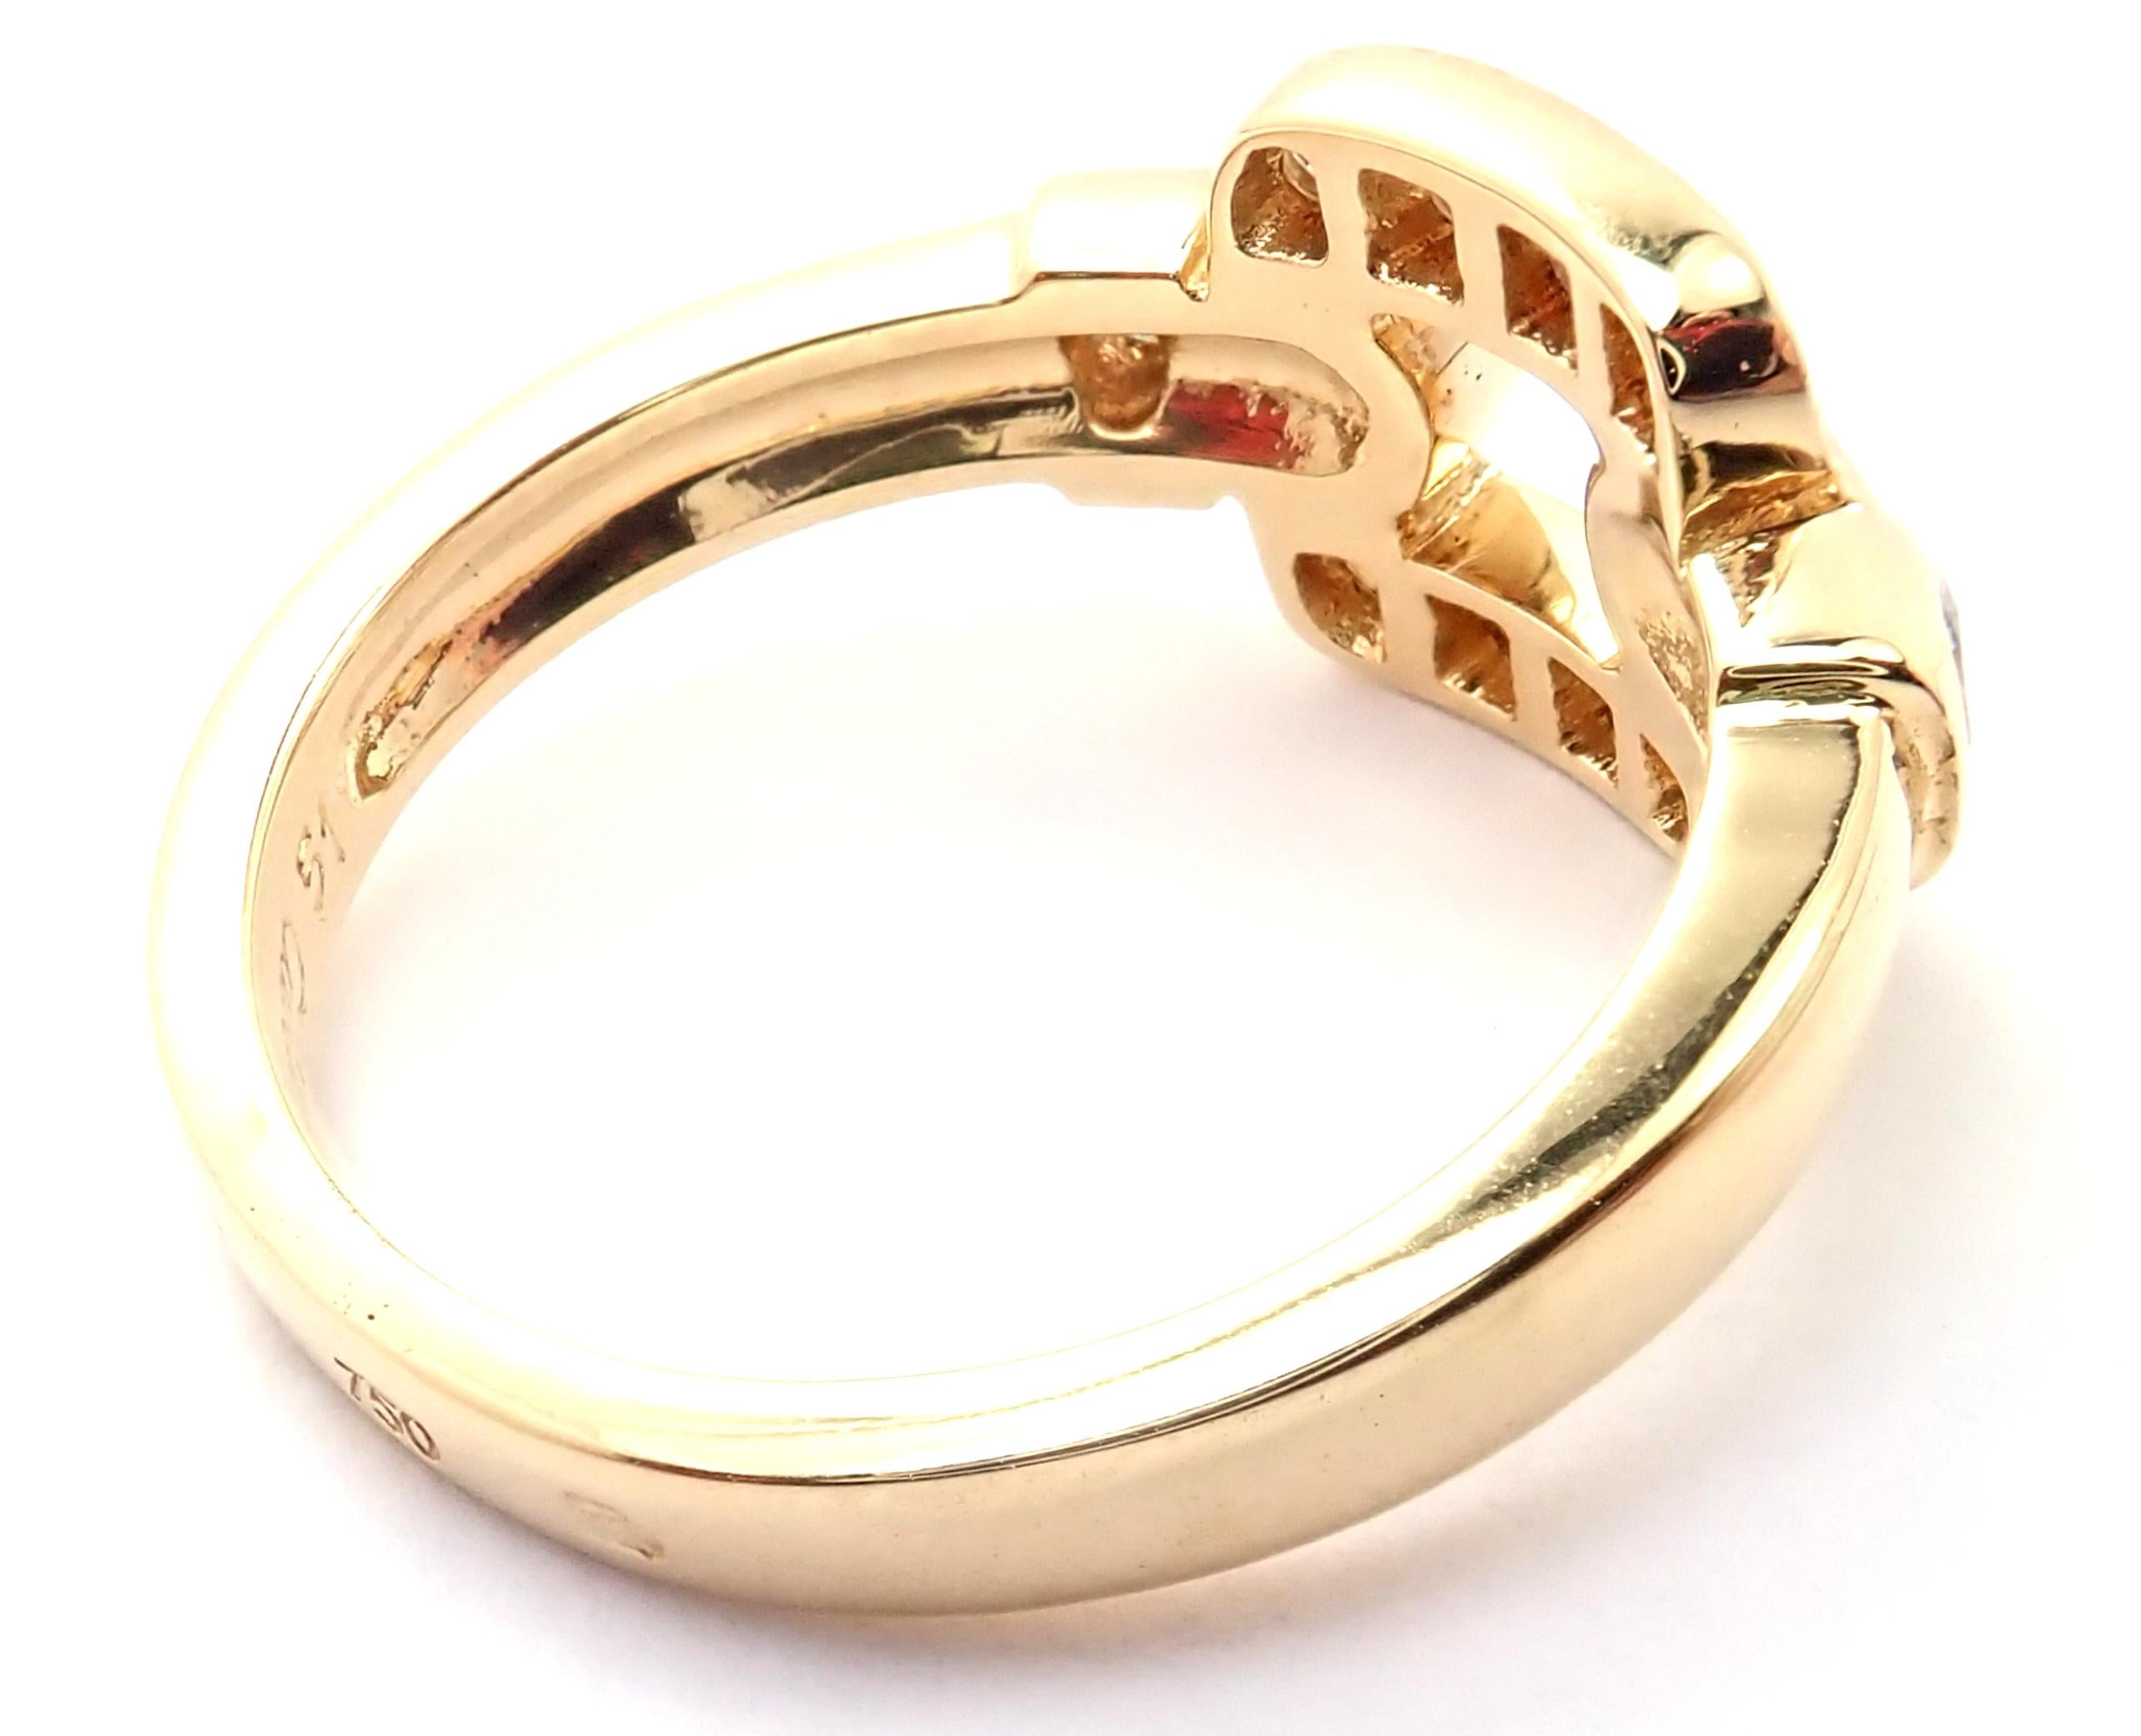 18k Yellow Gold Diamond  Nymphea Band Ring by Cartier. 
With 10 round brilliant cut diamonds VVS1 clarity, E color total weight approximately .50ct
Details:
Ring Size: European 51, US 5.75
Weight: 4.9 grams
Width: 10mm
Stamped Hallmarks: Cartier 750